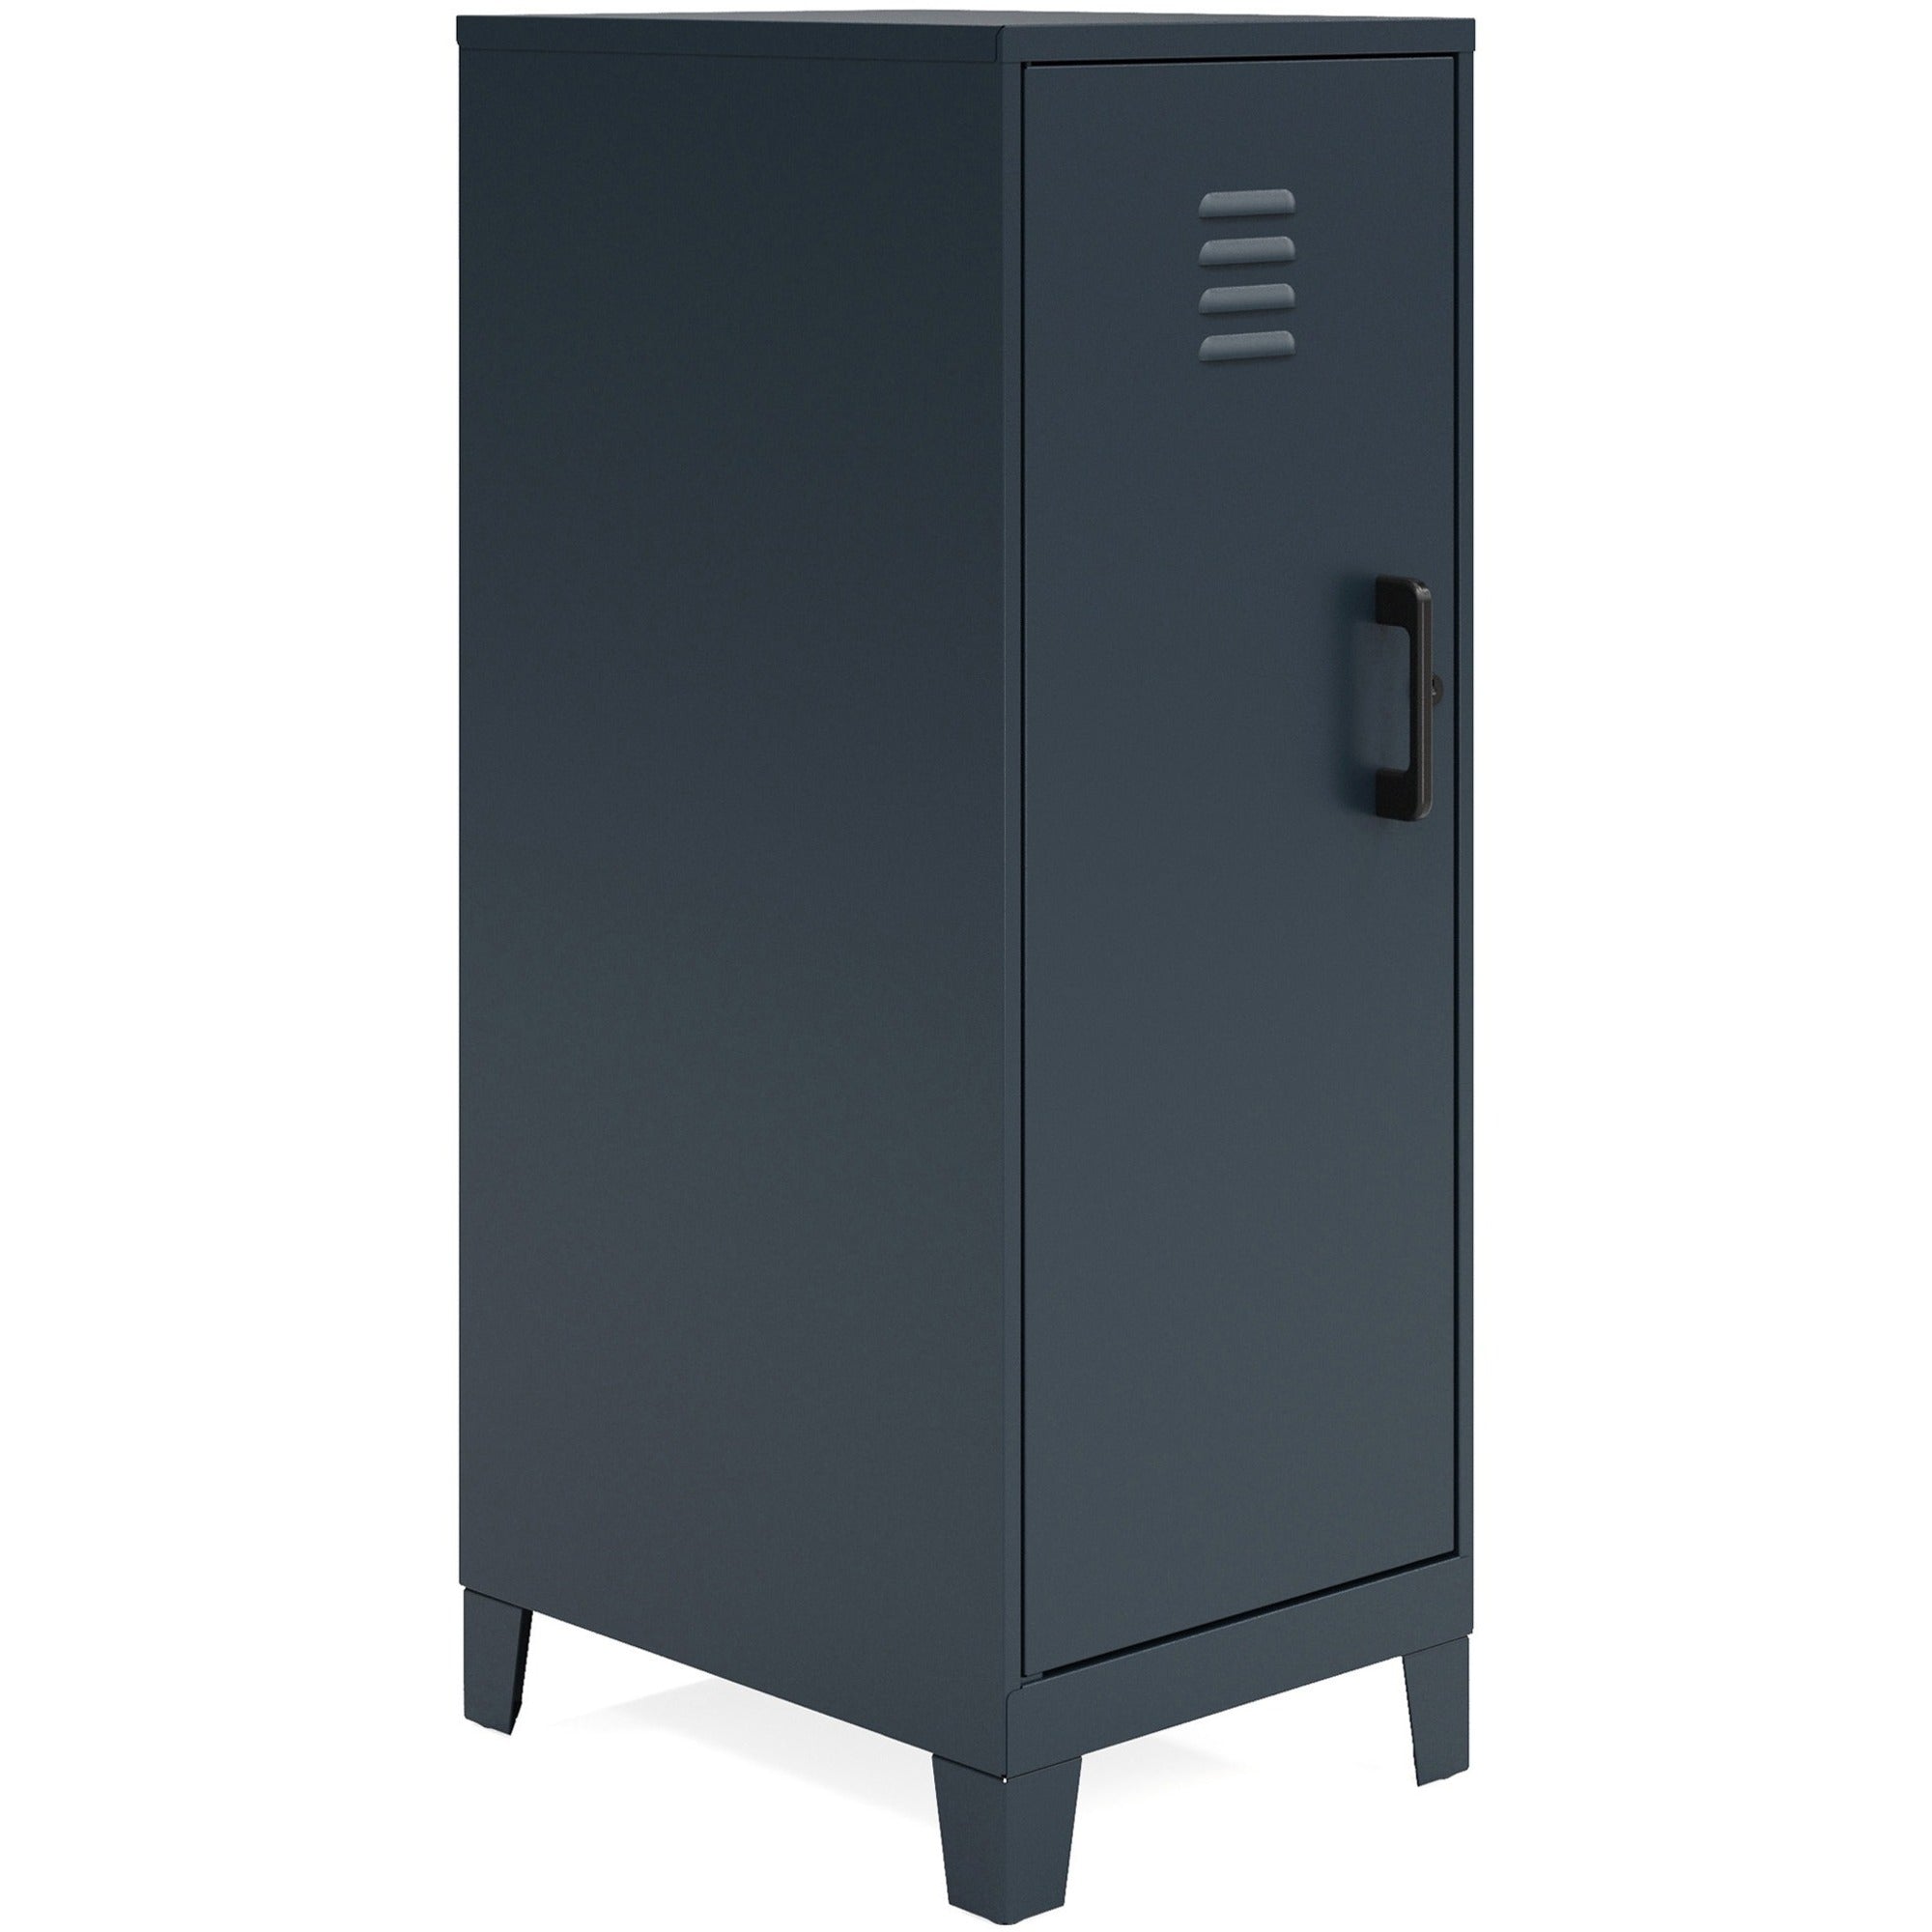 nusparc-personal-locker-3-shelves-for-office-home-sport-equipments-toy-game-classroom-playroom-basement-garage-overall-size-425-x-142-x-18-black-steel-taa-compliant_nprsl318zzbk - 1